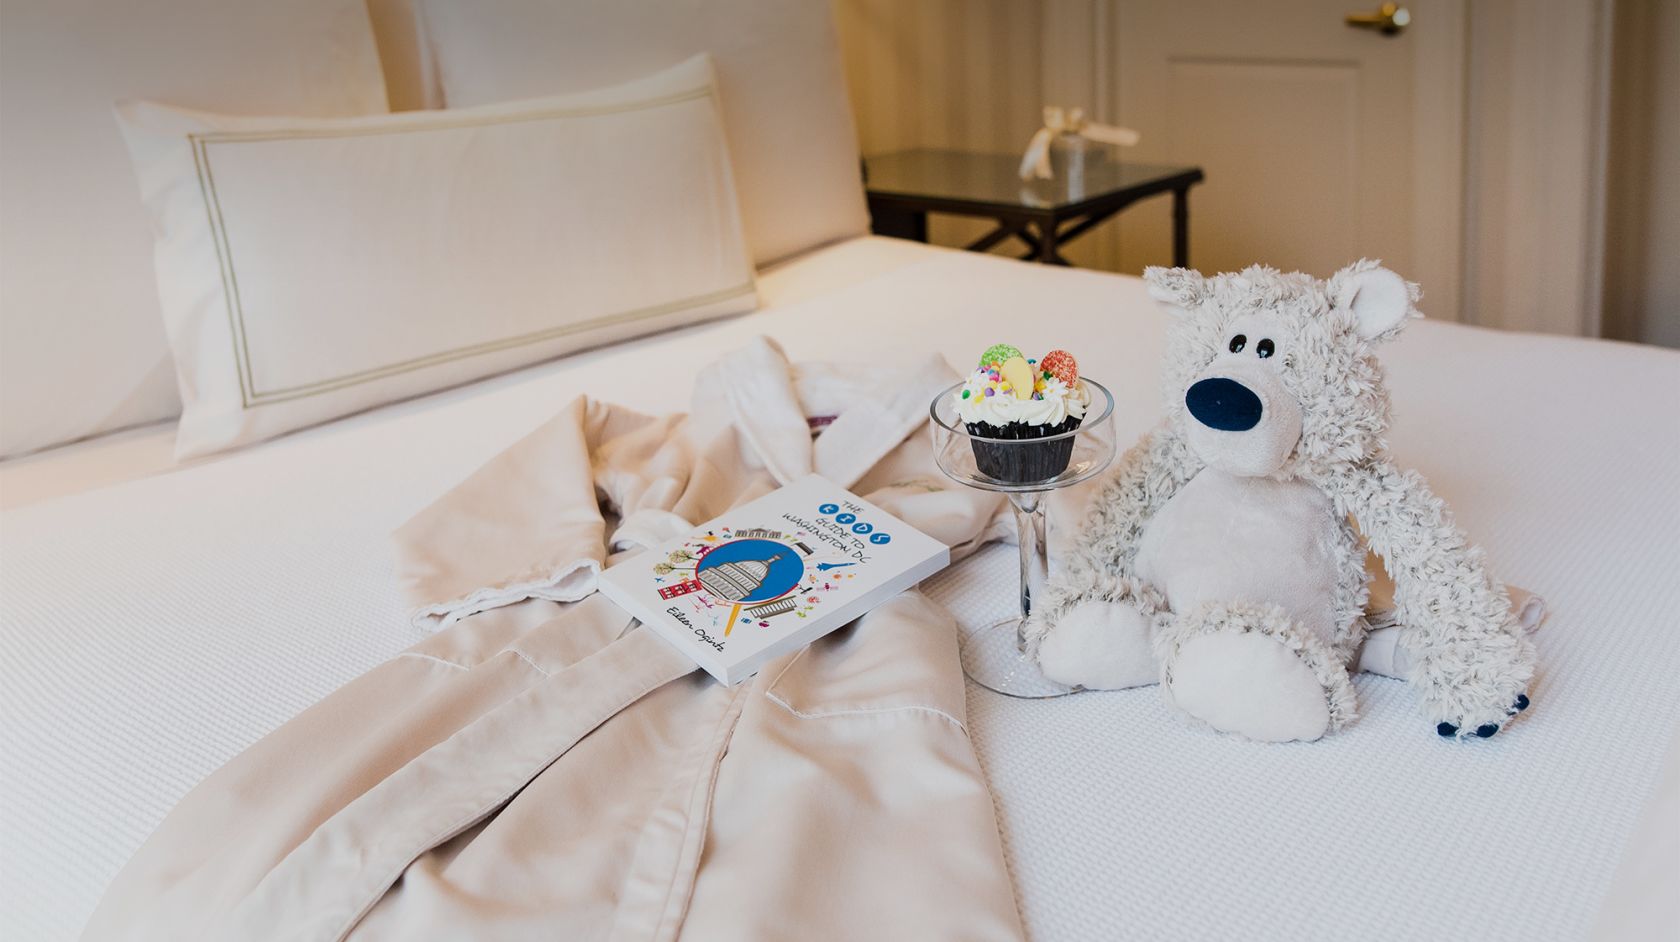 A Stuffed Animal Sitting On A Bed